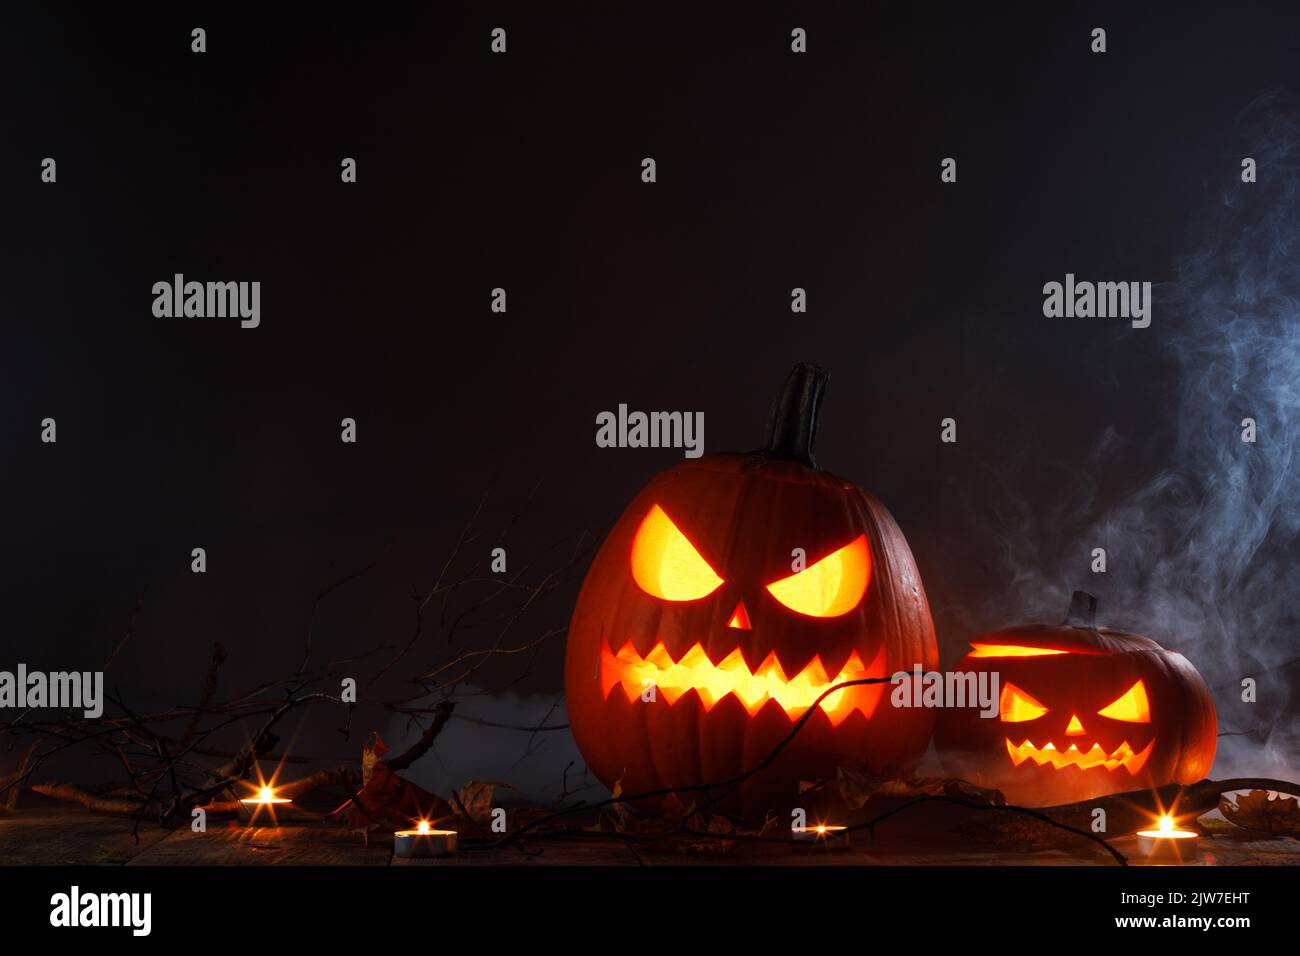 Halloween Jack O Lantern pumpkins and burning candles in mist traditional decoration Stock Photo